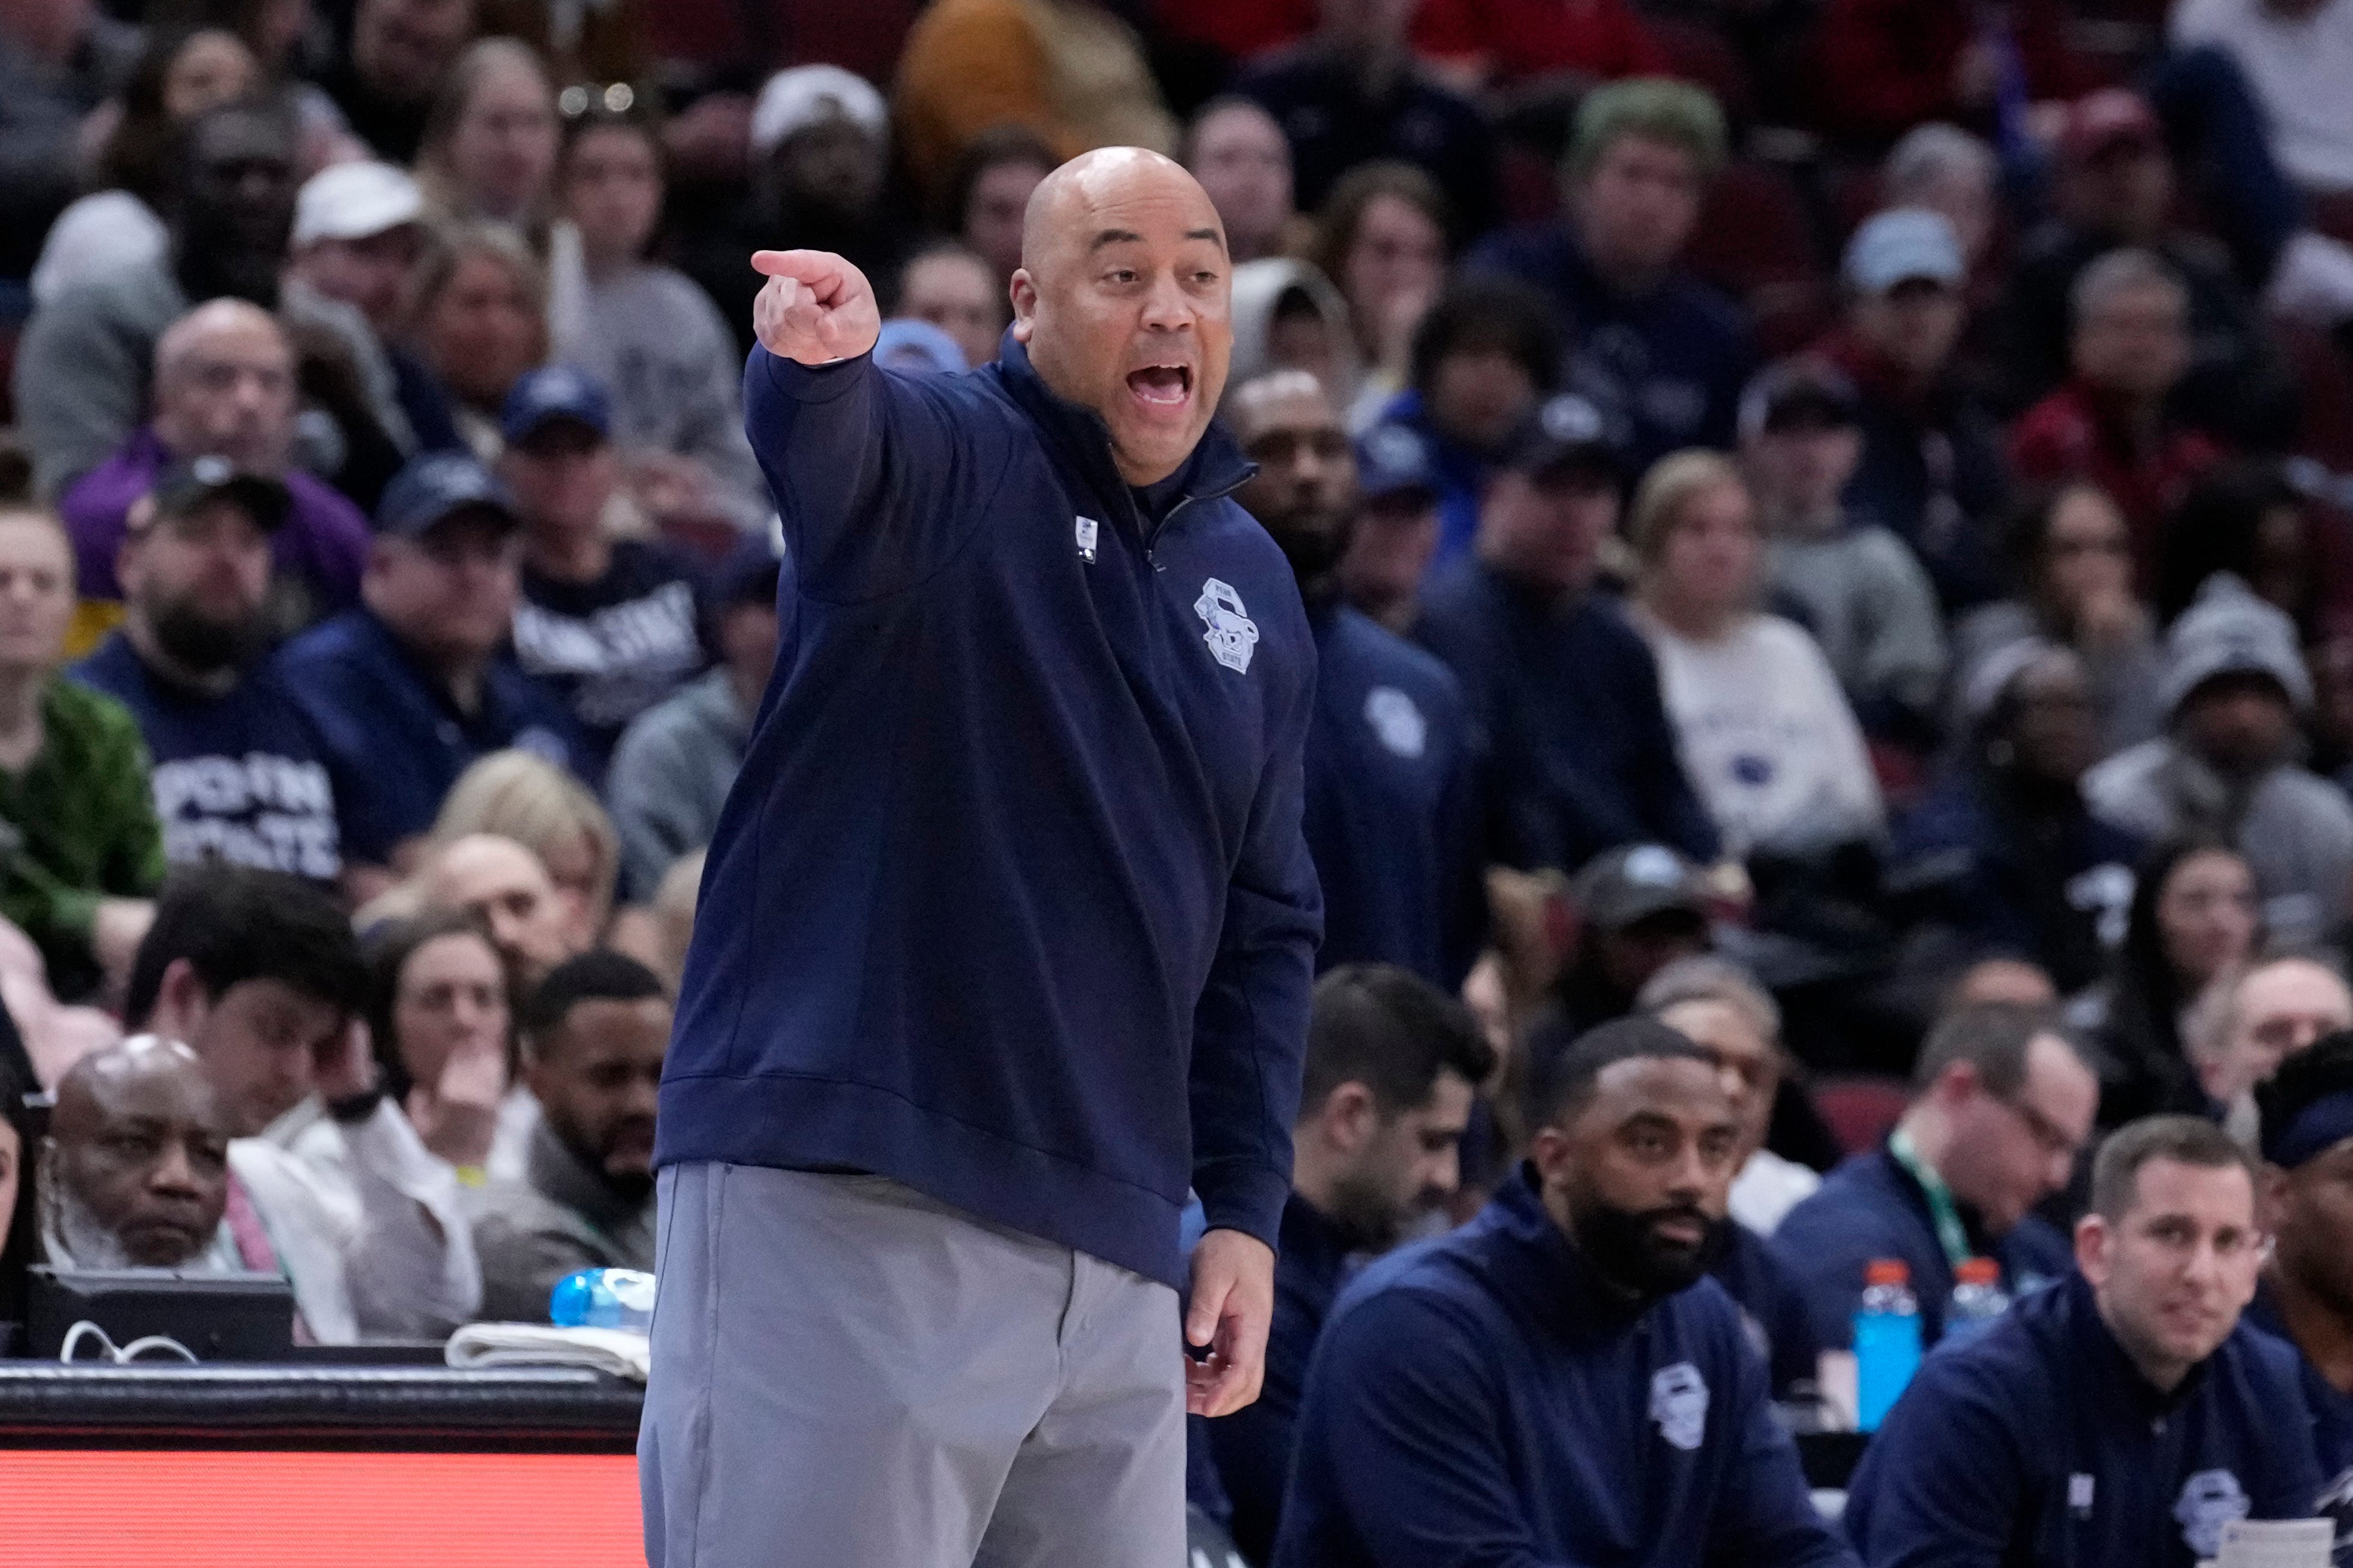 5 things about new Notre Dame men's basketball coach Micah Shrewsberry